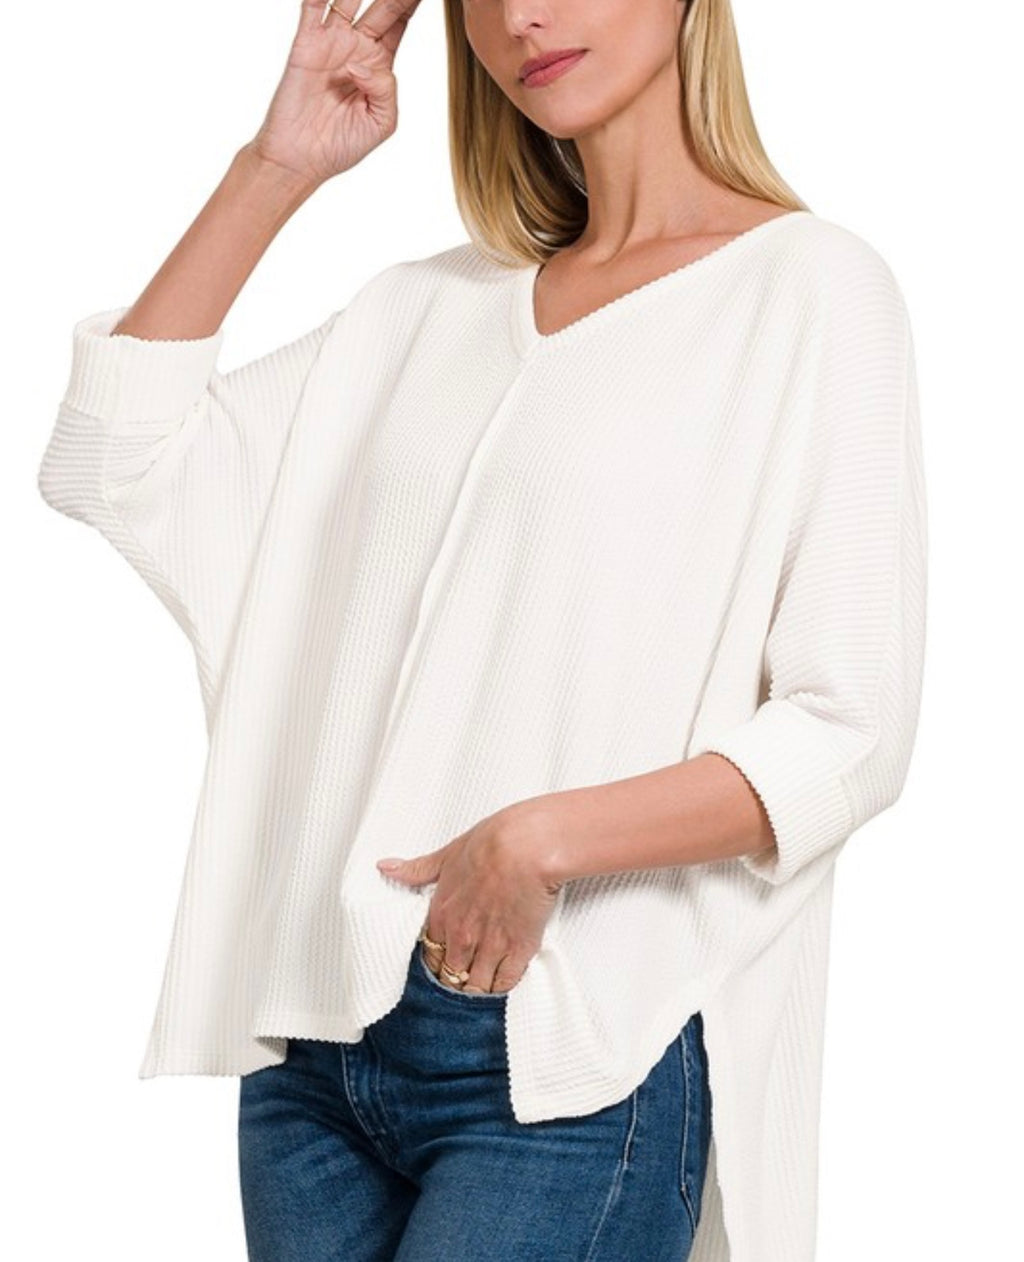 Ribbed 3/4 Top (8 colors)